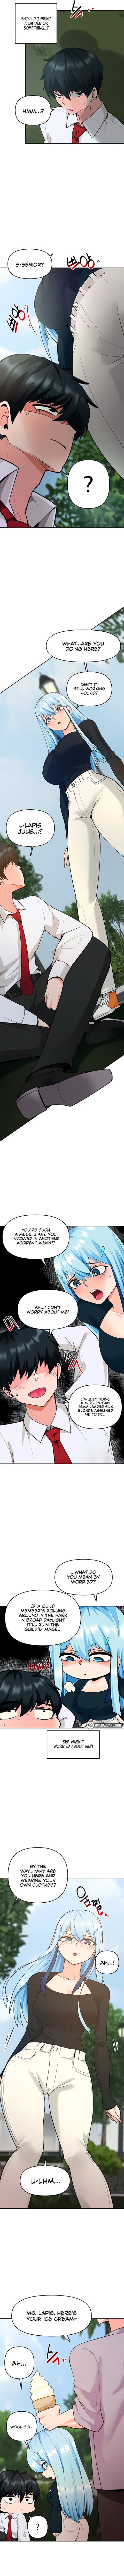 the-hypnosis-app-was-fake-chap-39-6